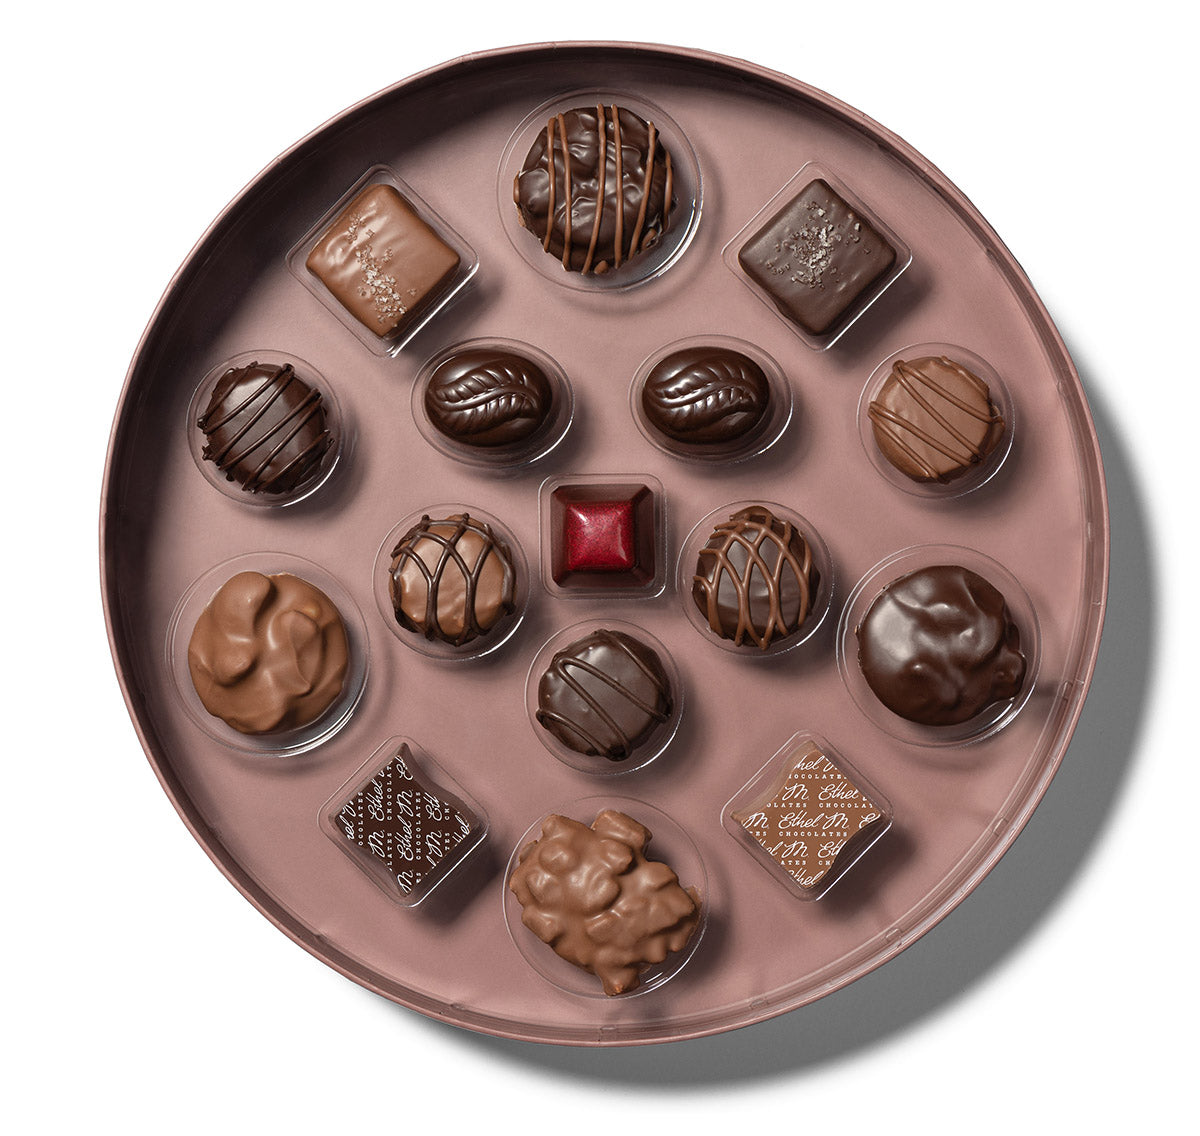 open tray of chocolatier's collection showing chocolate